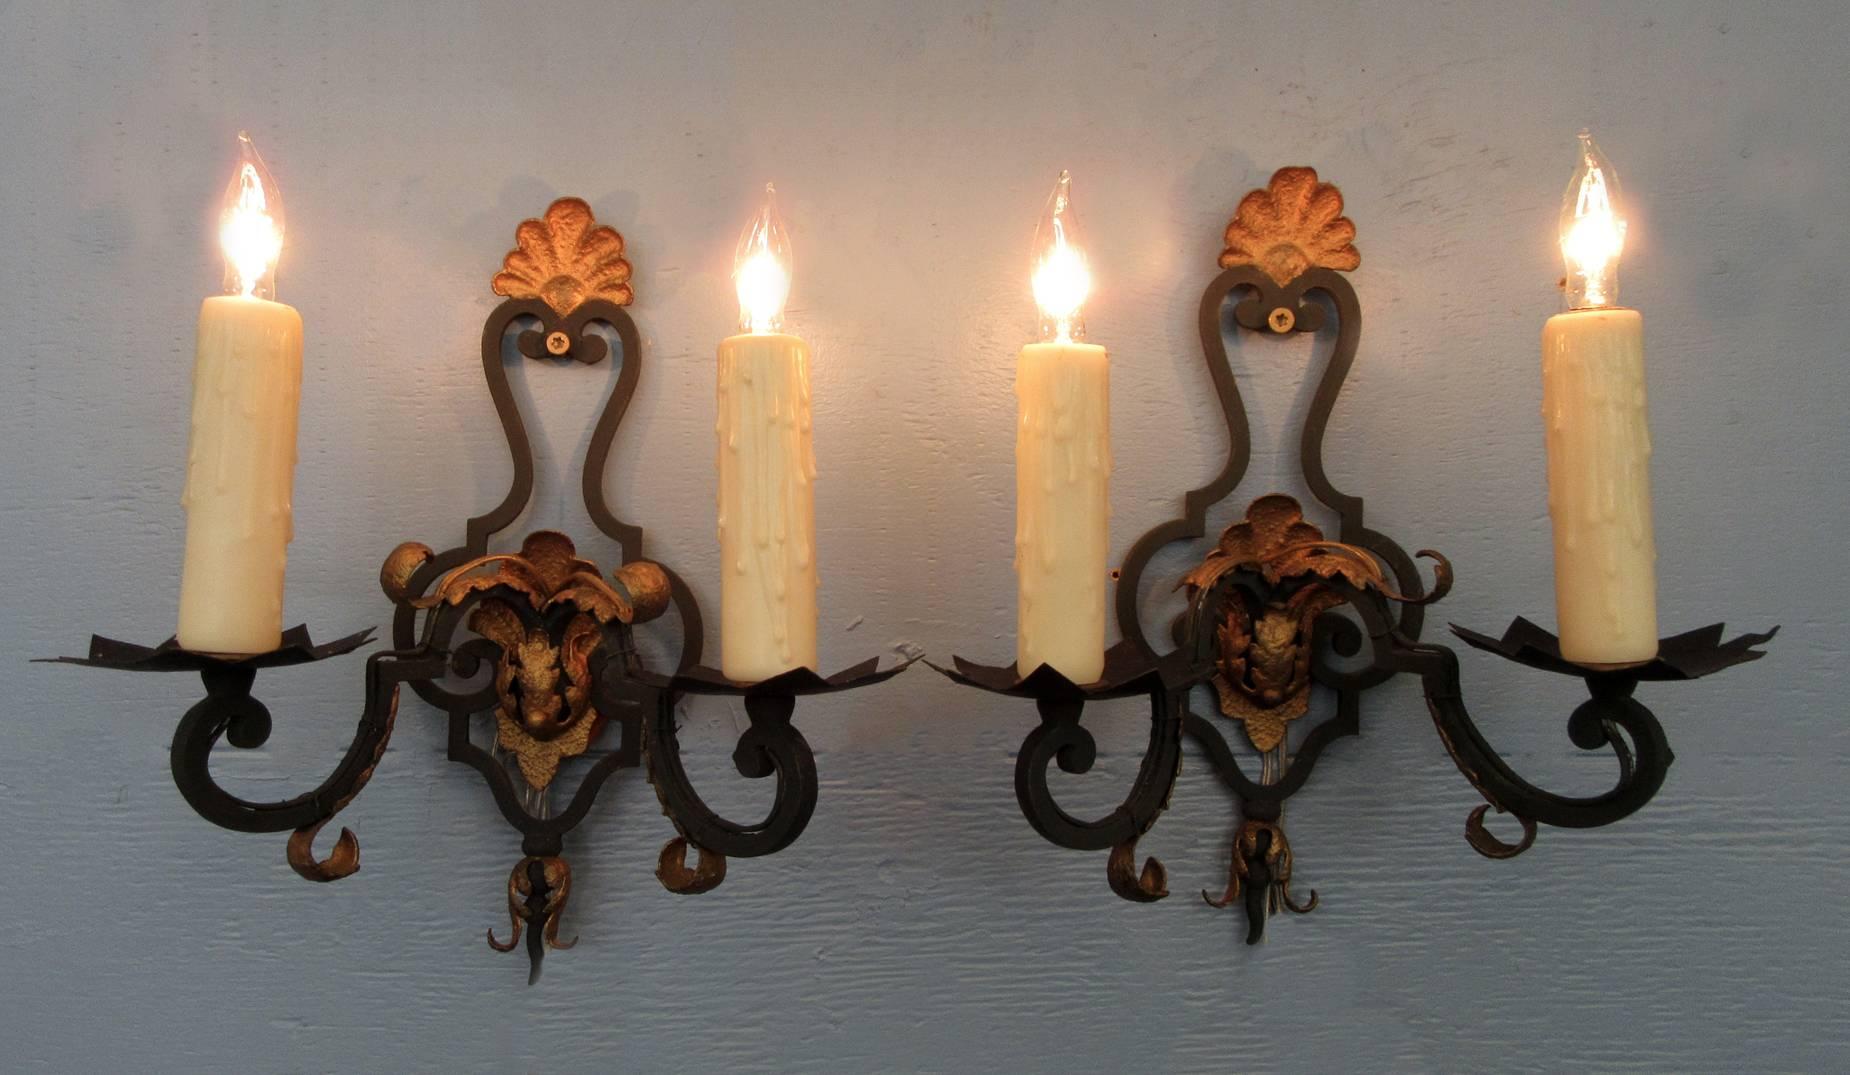 An early 20th century pair of small French Rococo iron and gilt tole sconces, circa 1910, each featuring two candle arms, shell and scrolling foliage motif.  The pair have been cleaned and recently rewired with new porcelain sockets.